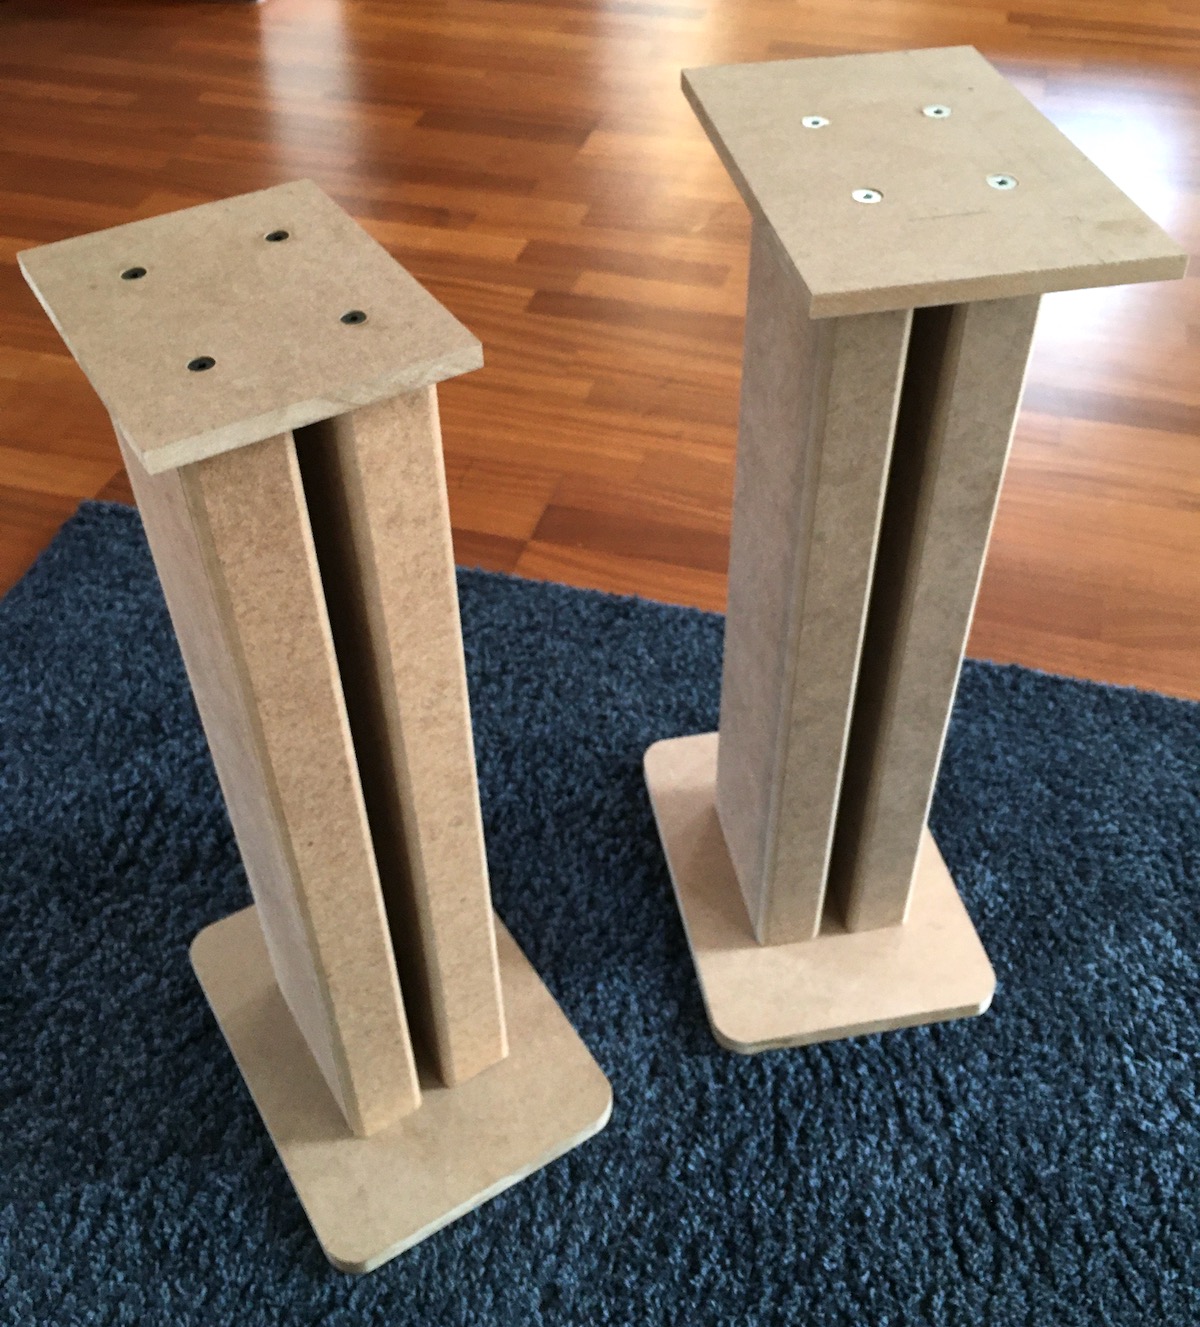 Test assembly of my DIY speaker stands with different top plates.